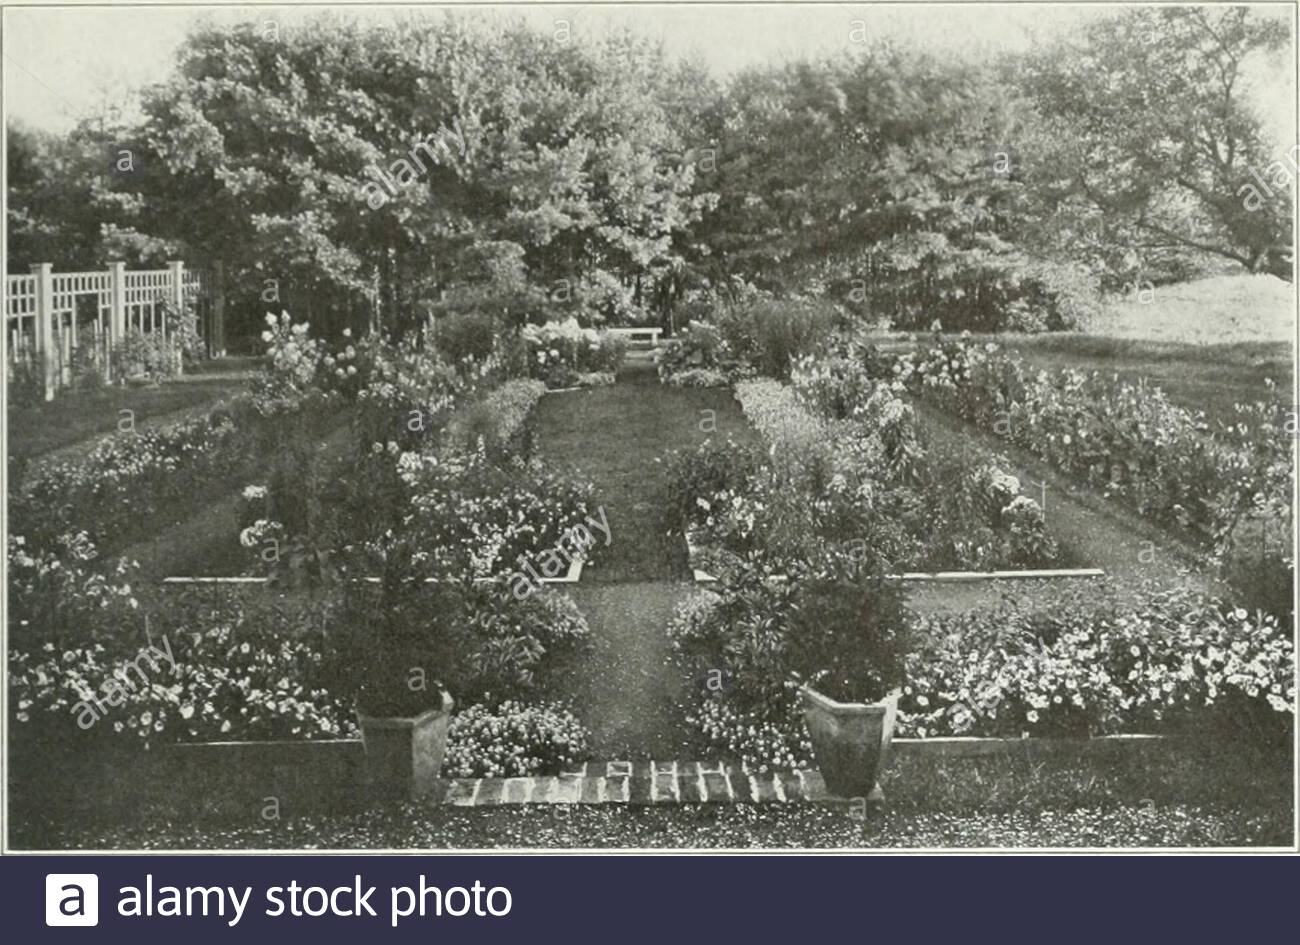 beautiful gardens in america from a photograph by jessie tarbox beals cornish n h stephen parrish esq fron d photograph by jcnic tarhgt bca cornish n h mrs william h hyde 2AJ0KW0